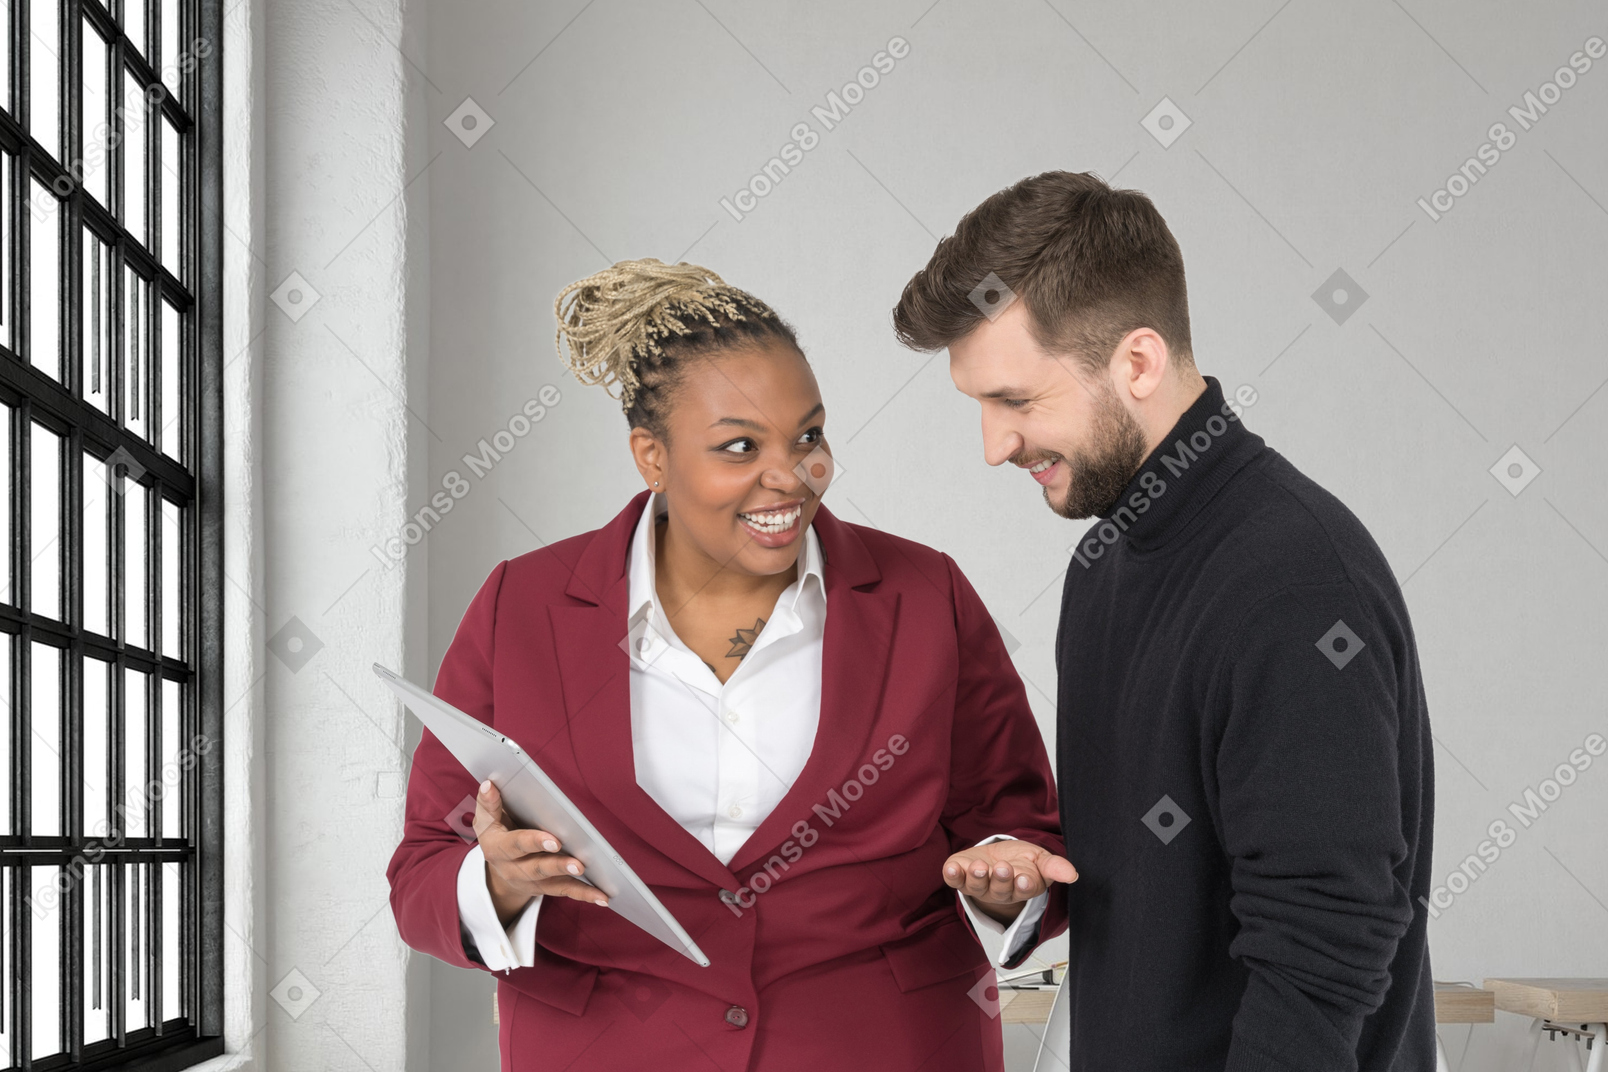 A woman with tablet and a man are laughing